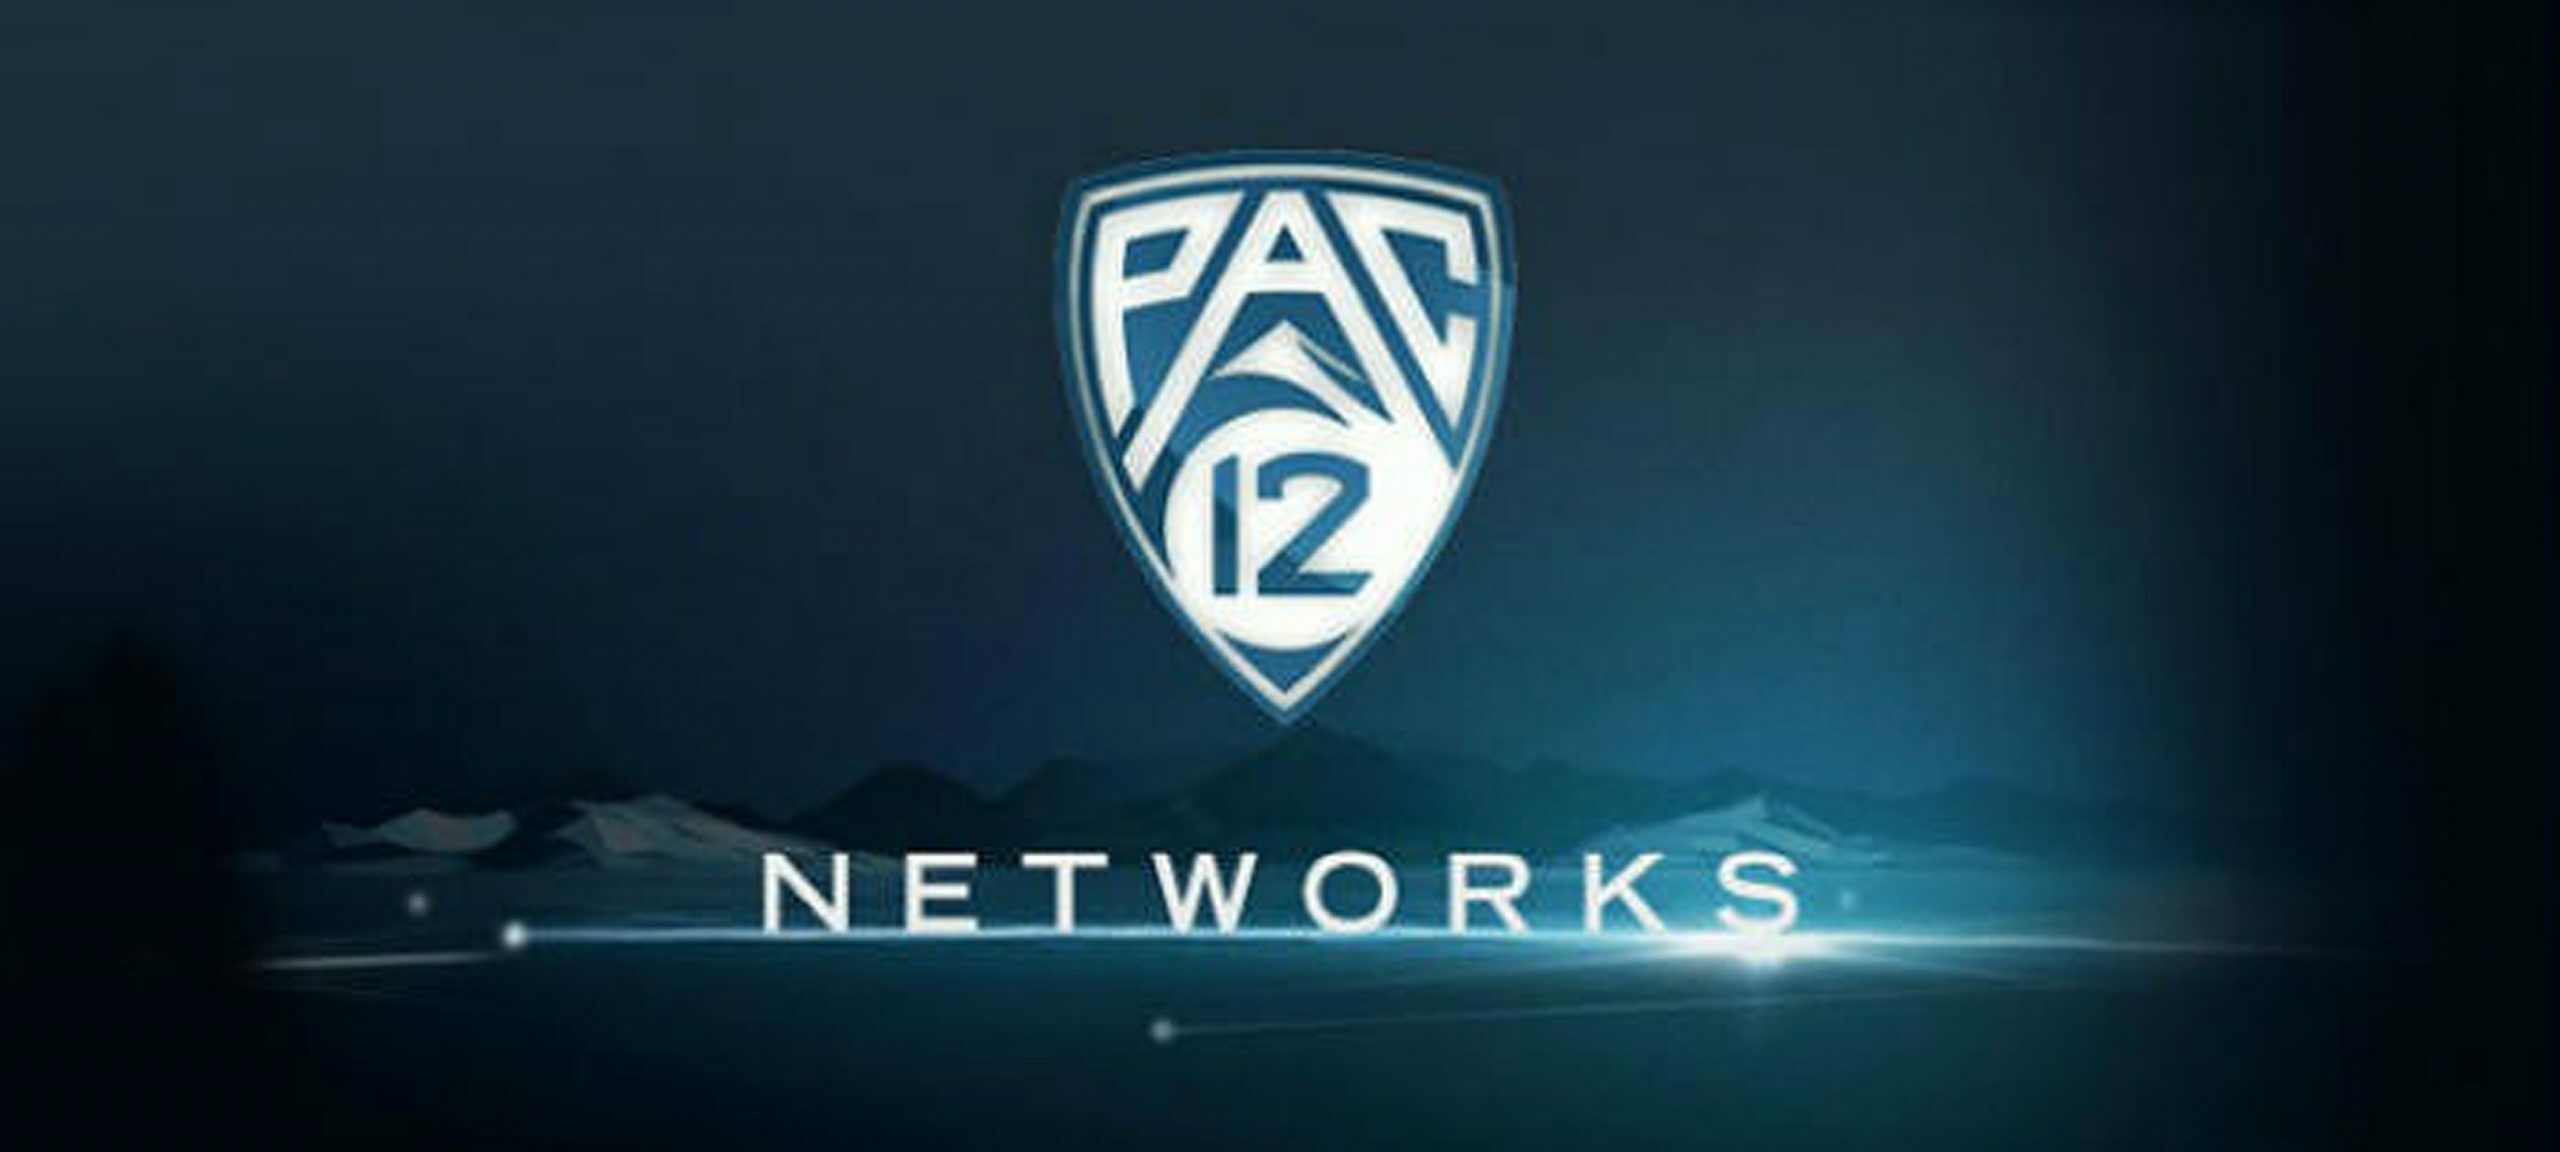 Pac-12 TV Network is at Death’s Door With Layoffs Coming 